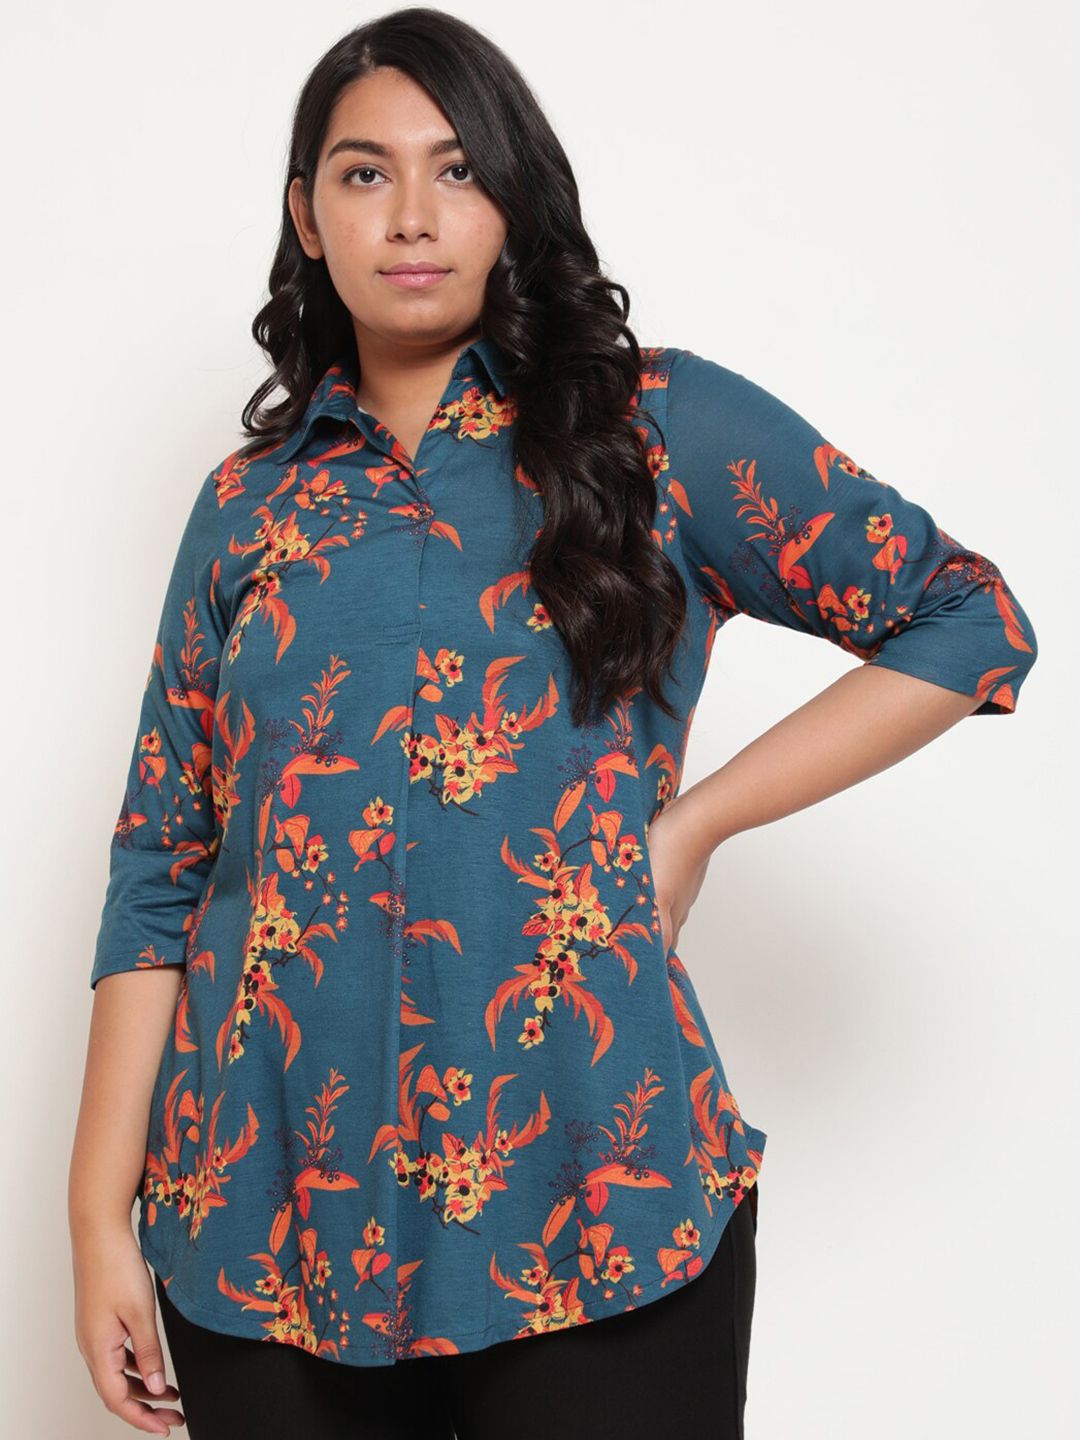 Amydus Plus Size Women Teal Blue & Orange Floral Print Shirt Style Longline Top Price in India